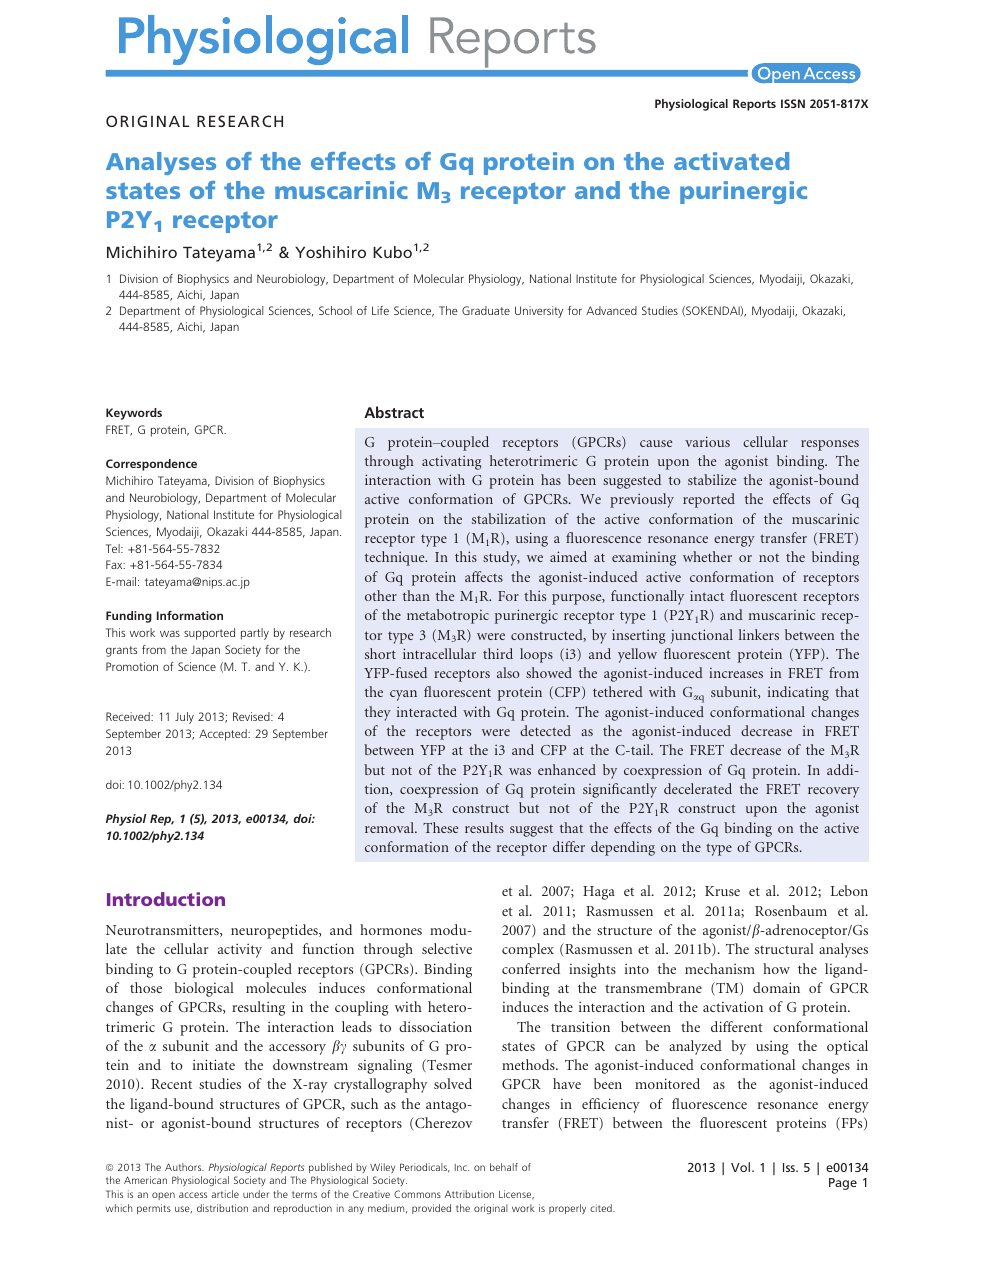 Analyses Of The Effects Of Gq Protein On The Activated States Of The Muscarinic M 3 Receptor And The Purinergic P2y 1 Receptor Topic Of Research Paper In Biological Sciences Download